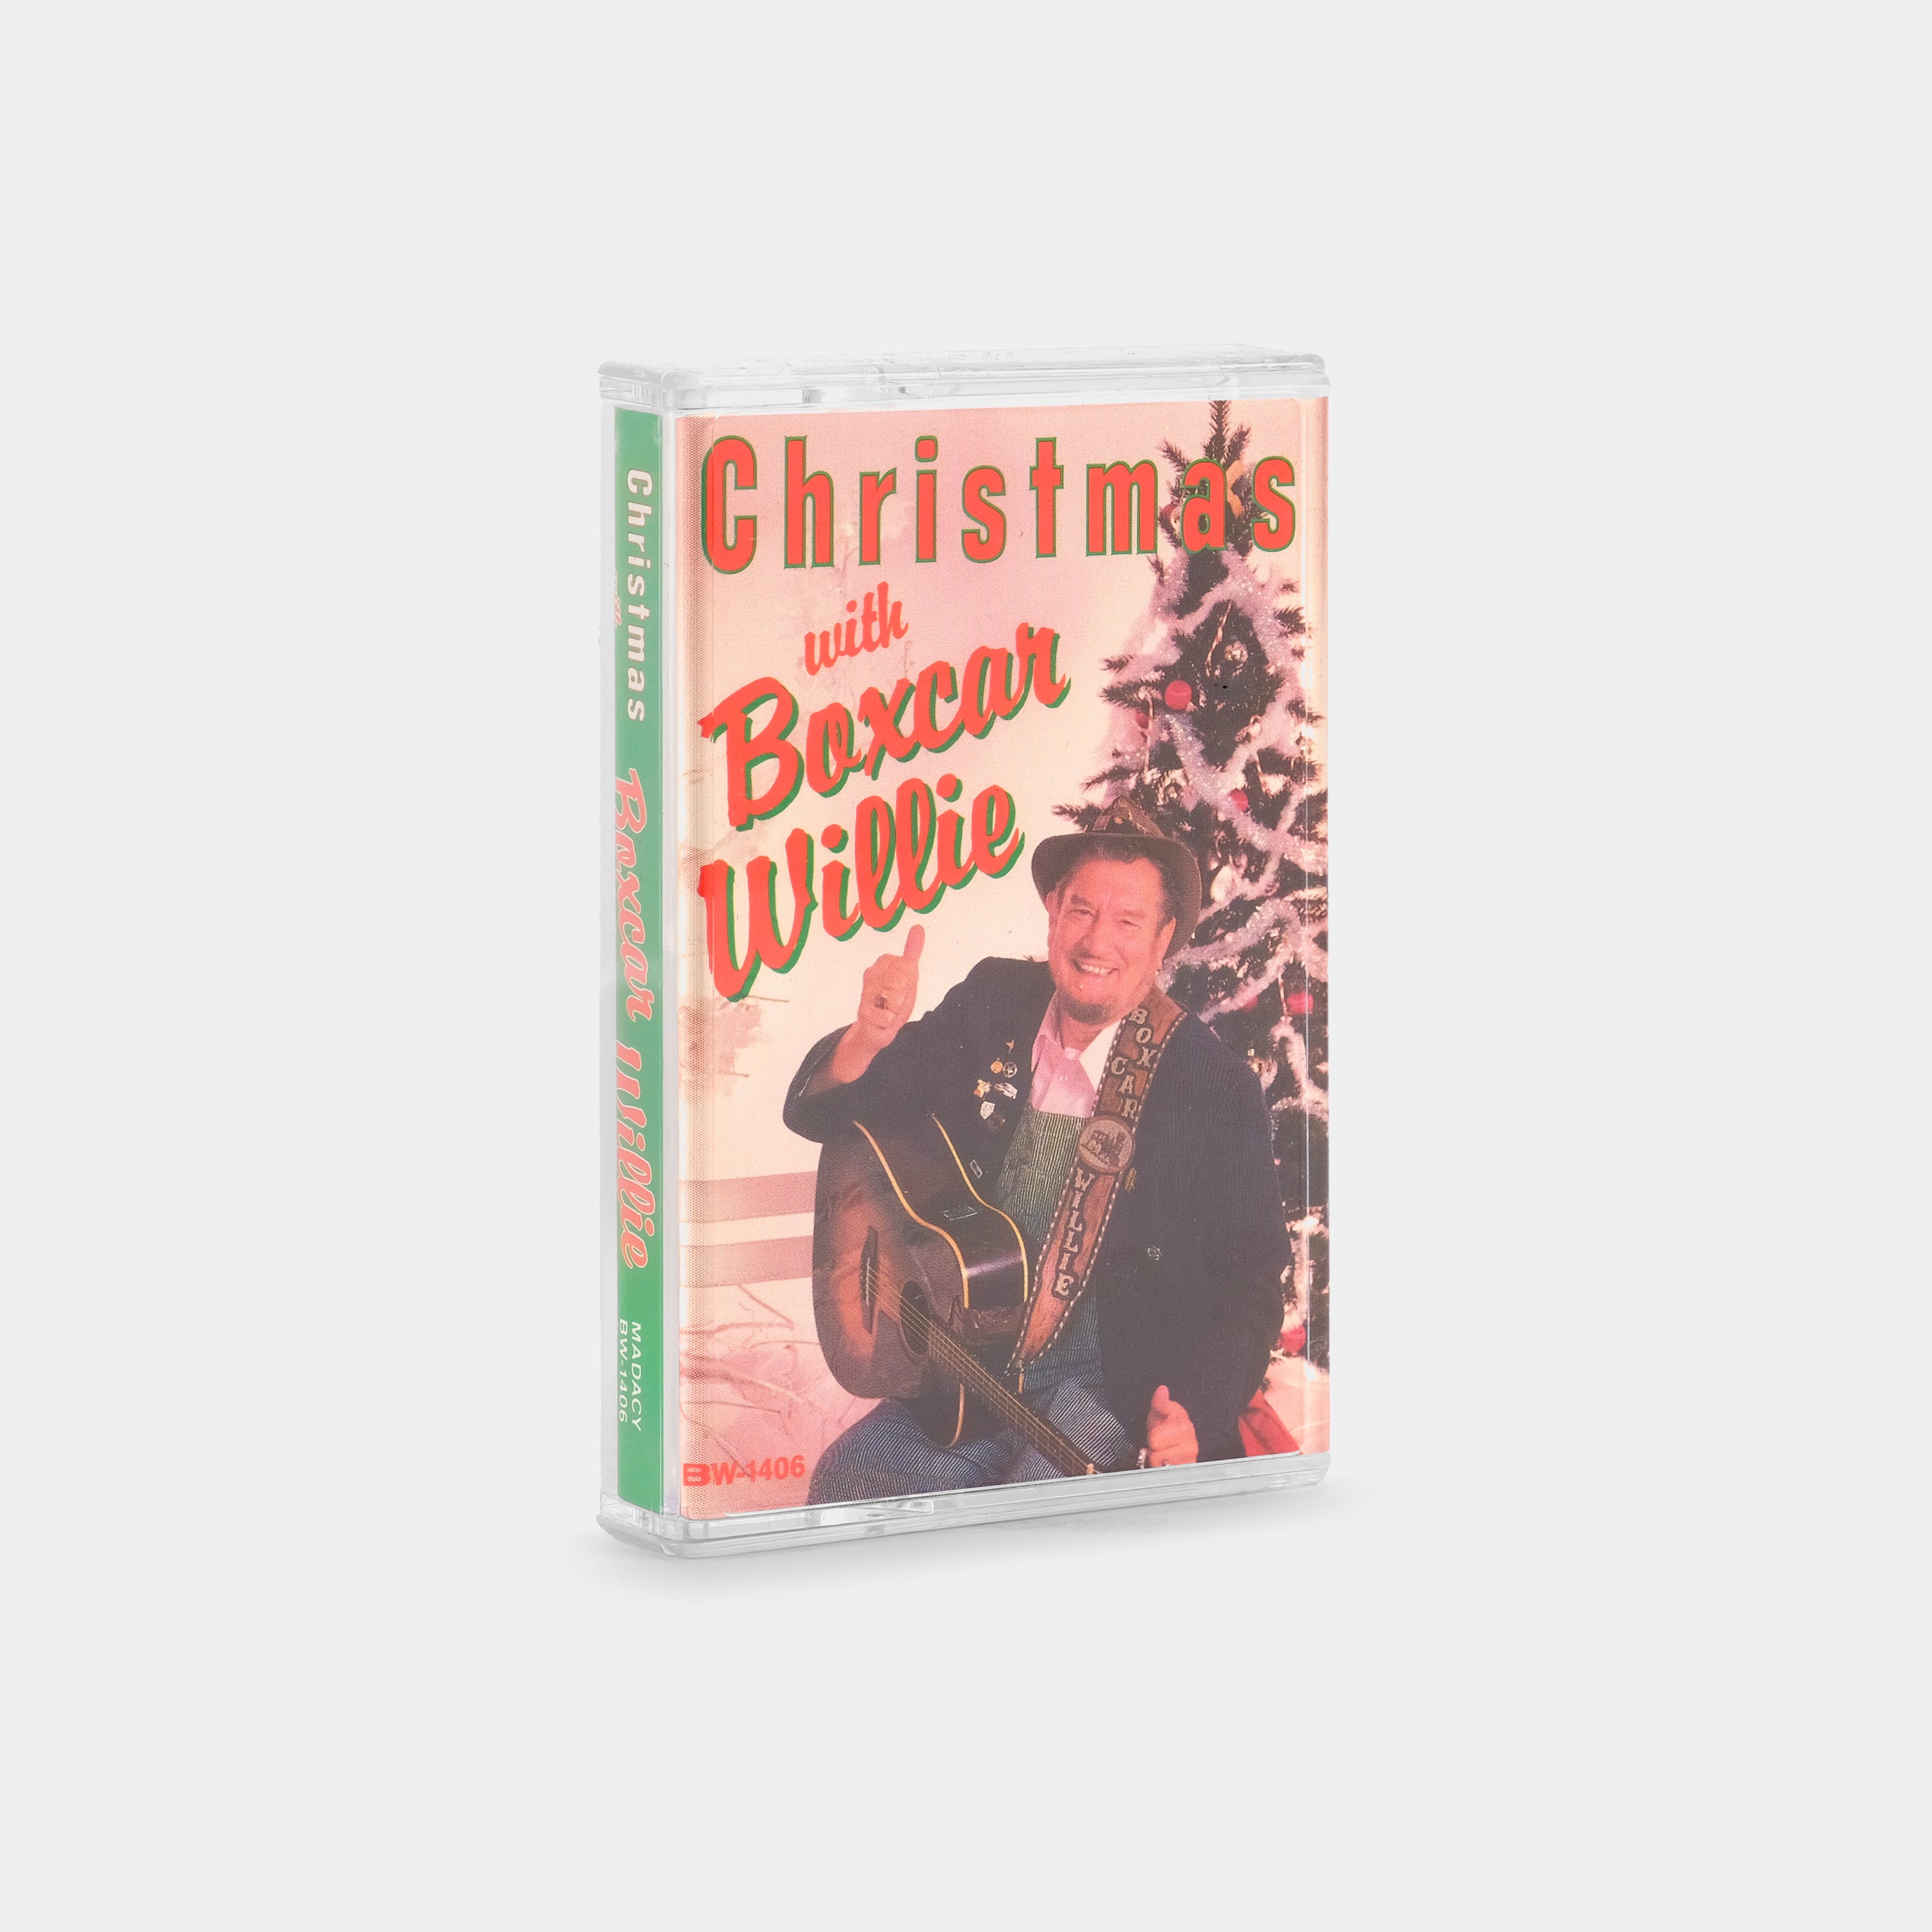 Boxcar Willie - Christmas With Boxcar Willie Cassette Tape